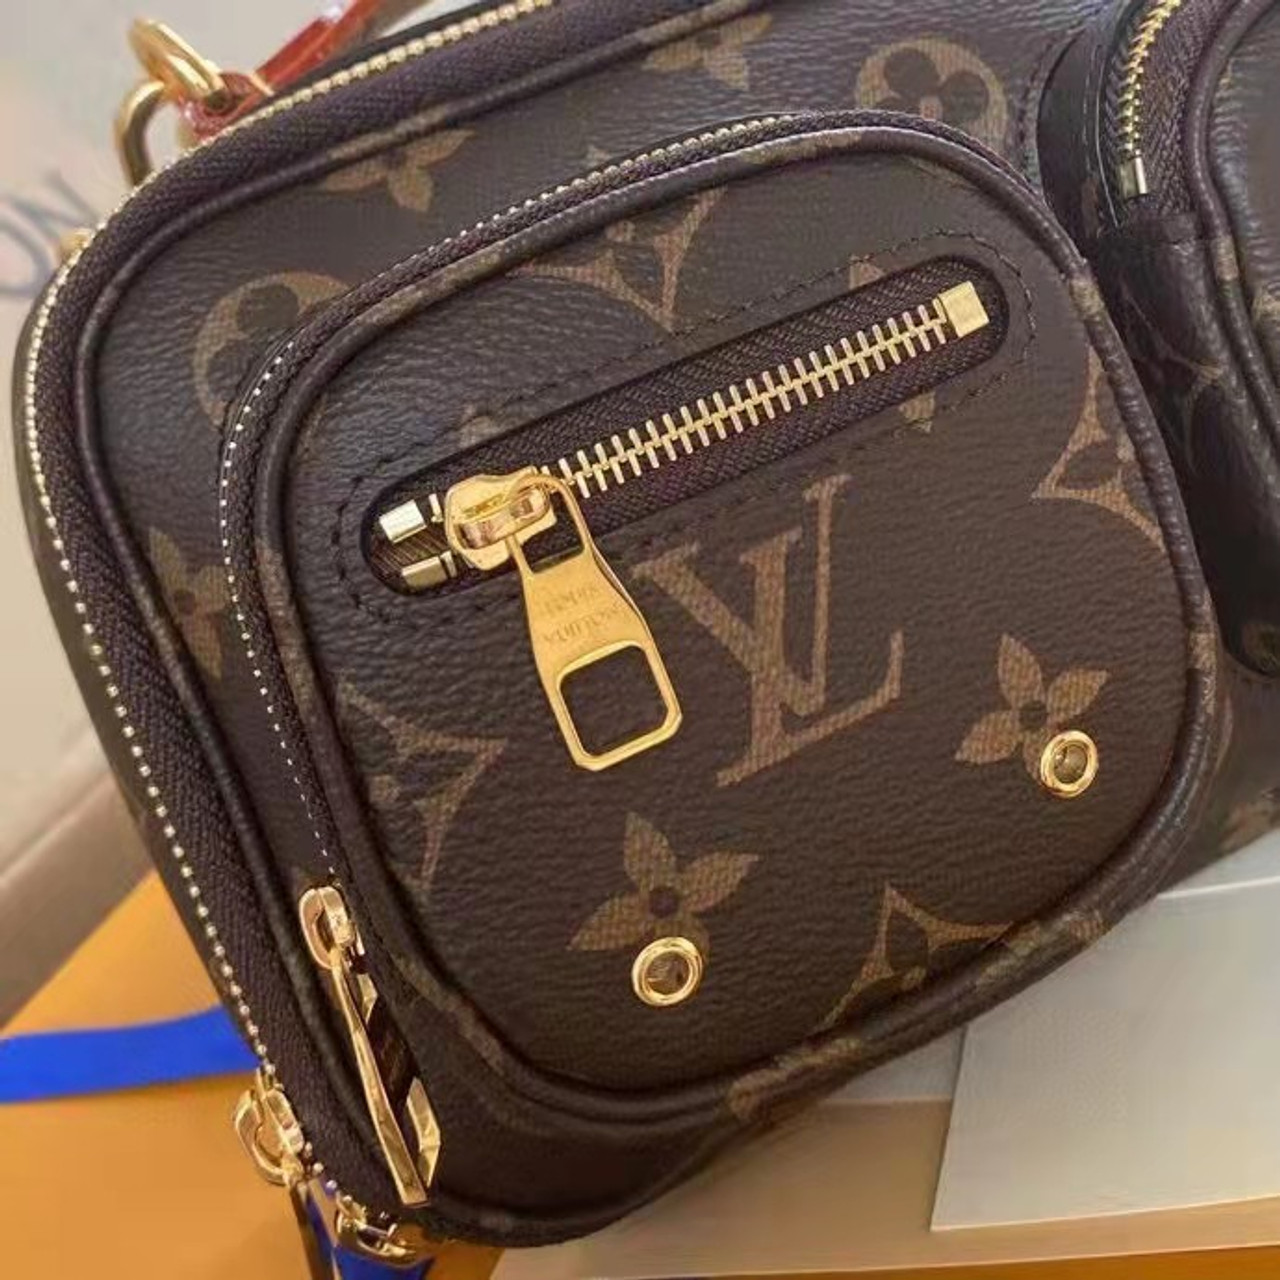 4227-Louis Vuitton 🔥 Copy 1 super high qaulity 🔥 Available upon